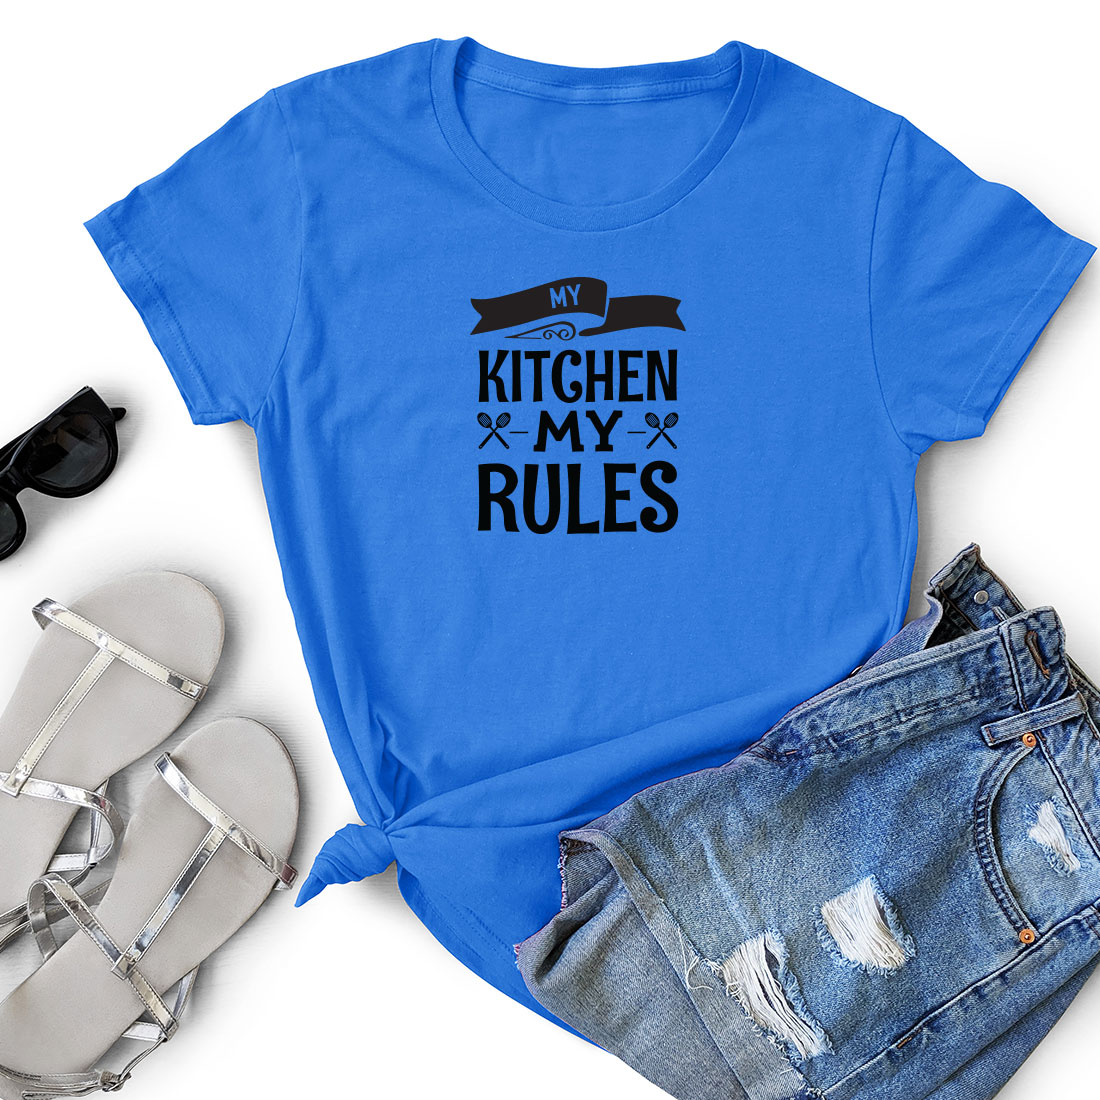 T - shirt that says kitchen my rules next to a pair of shorts.